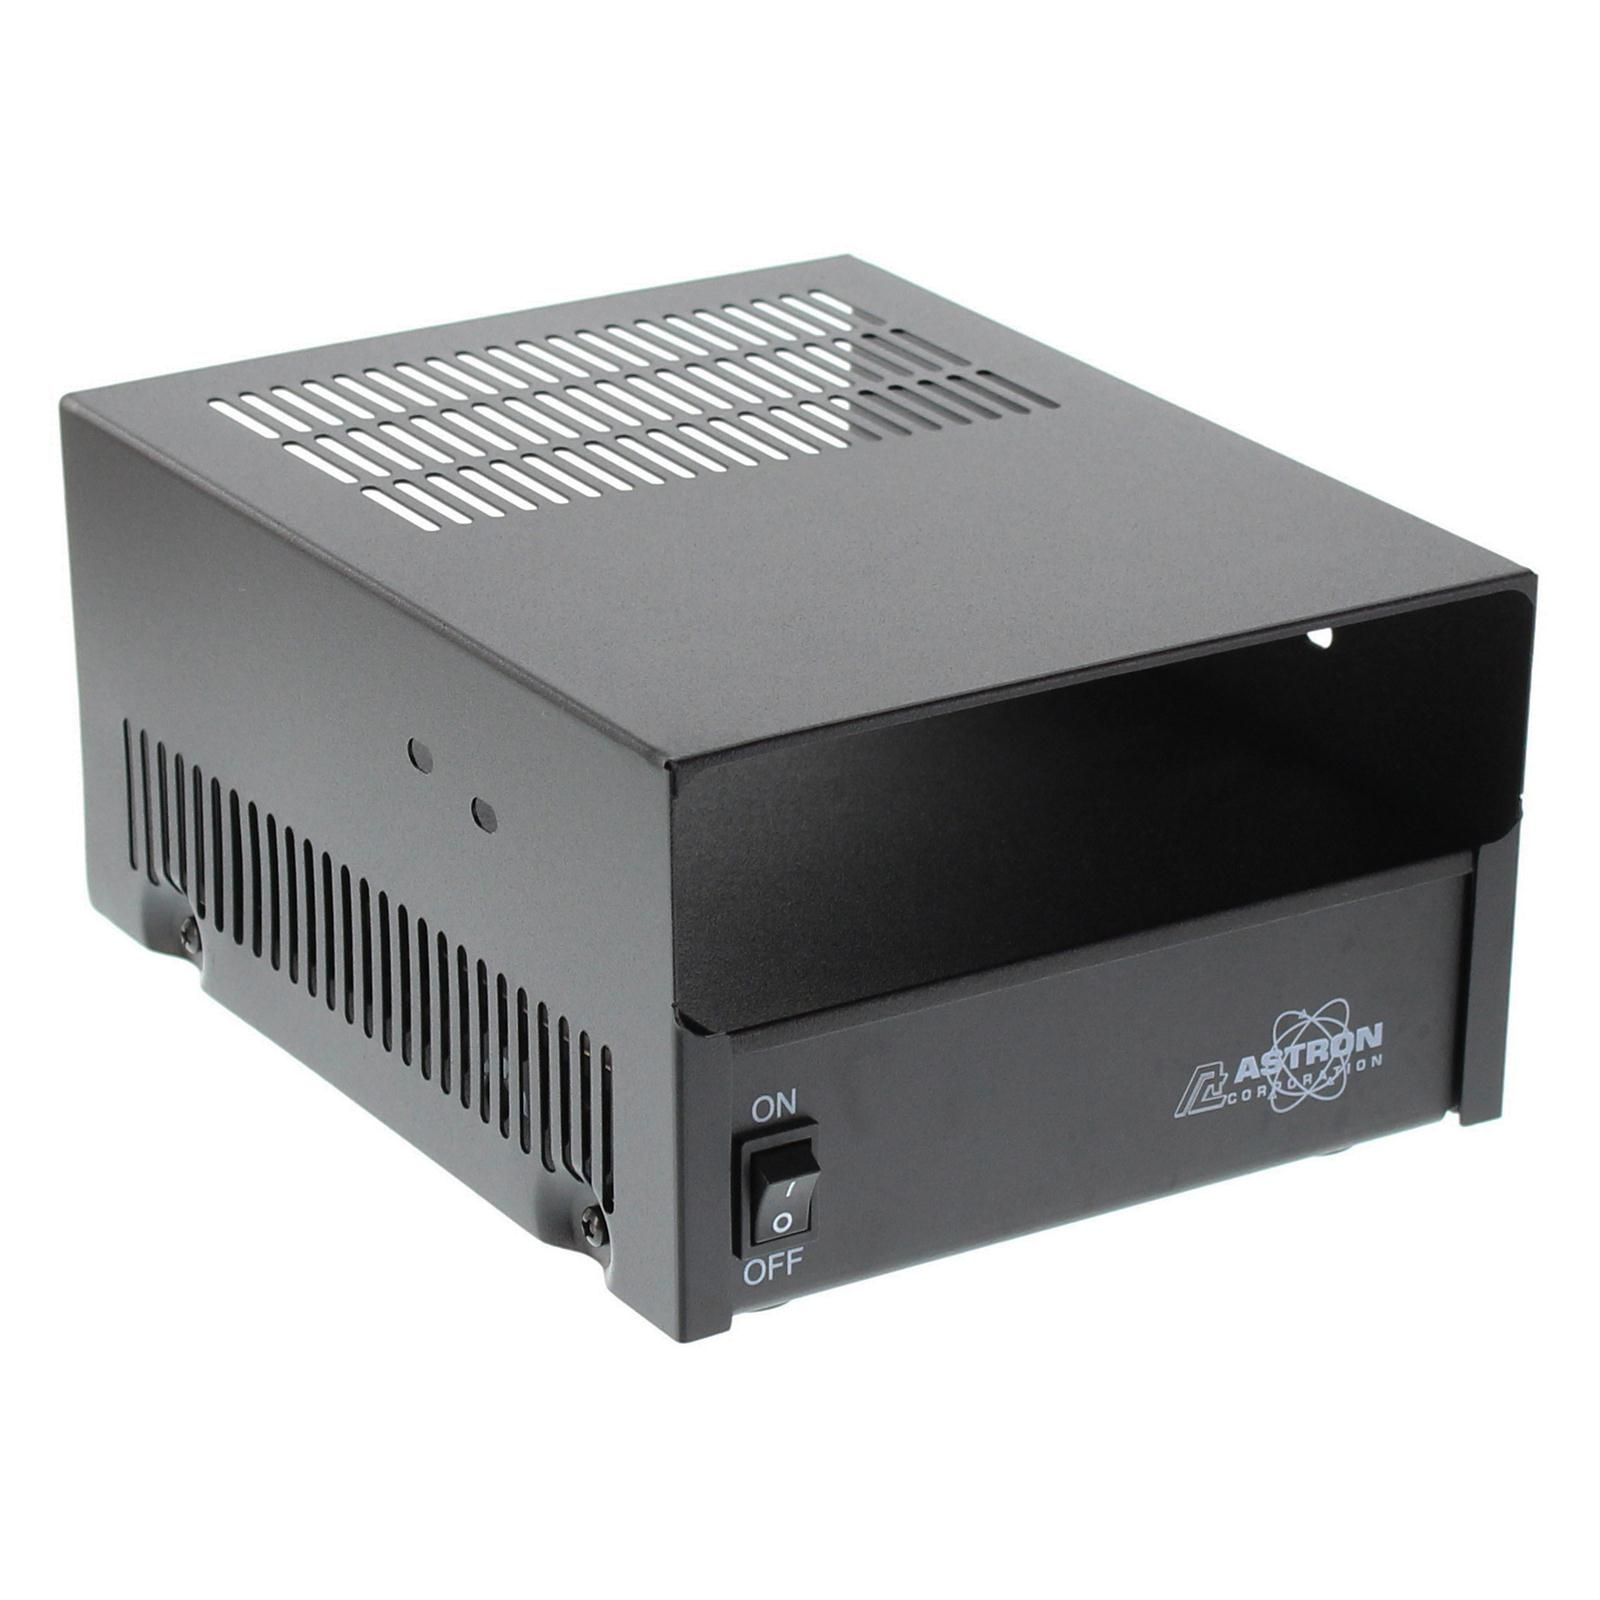 Astron Corporation Ss 10sm Gtx Astron Ss Series Switching Power